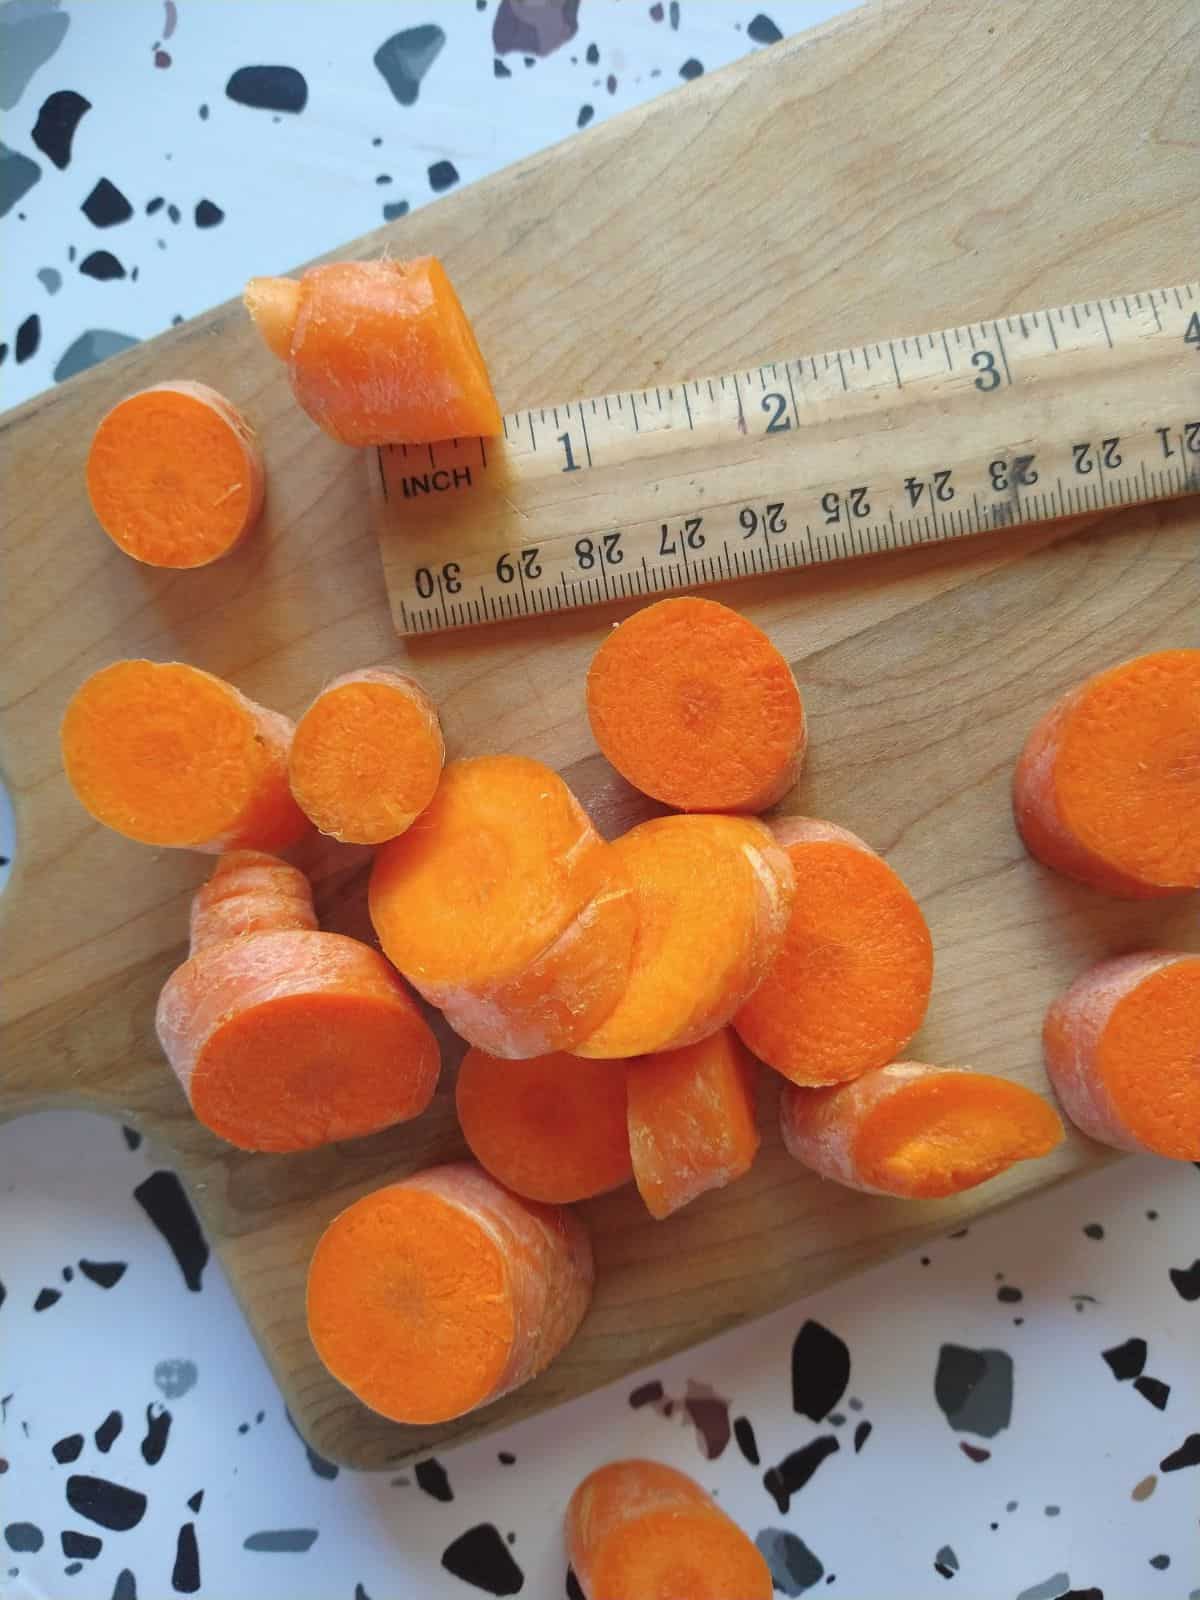 Sliced raw carrots on a cutting board with a ruler showing how think the slices are. They are about ½ to ¾ inch thick.